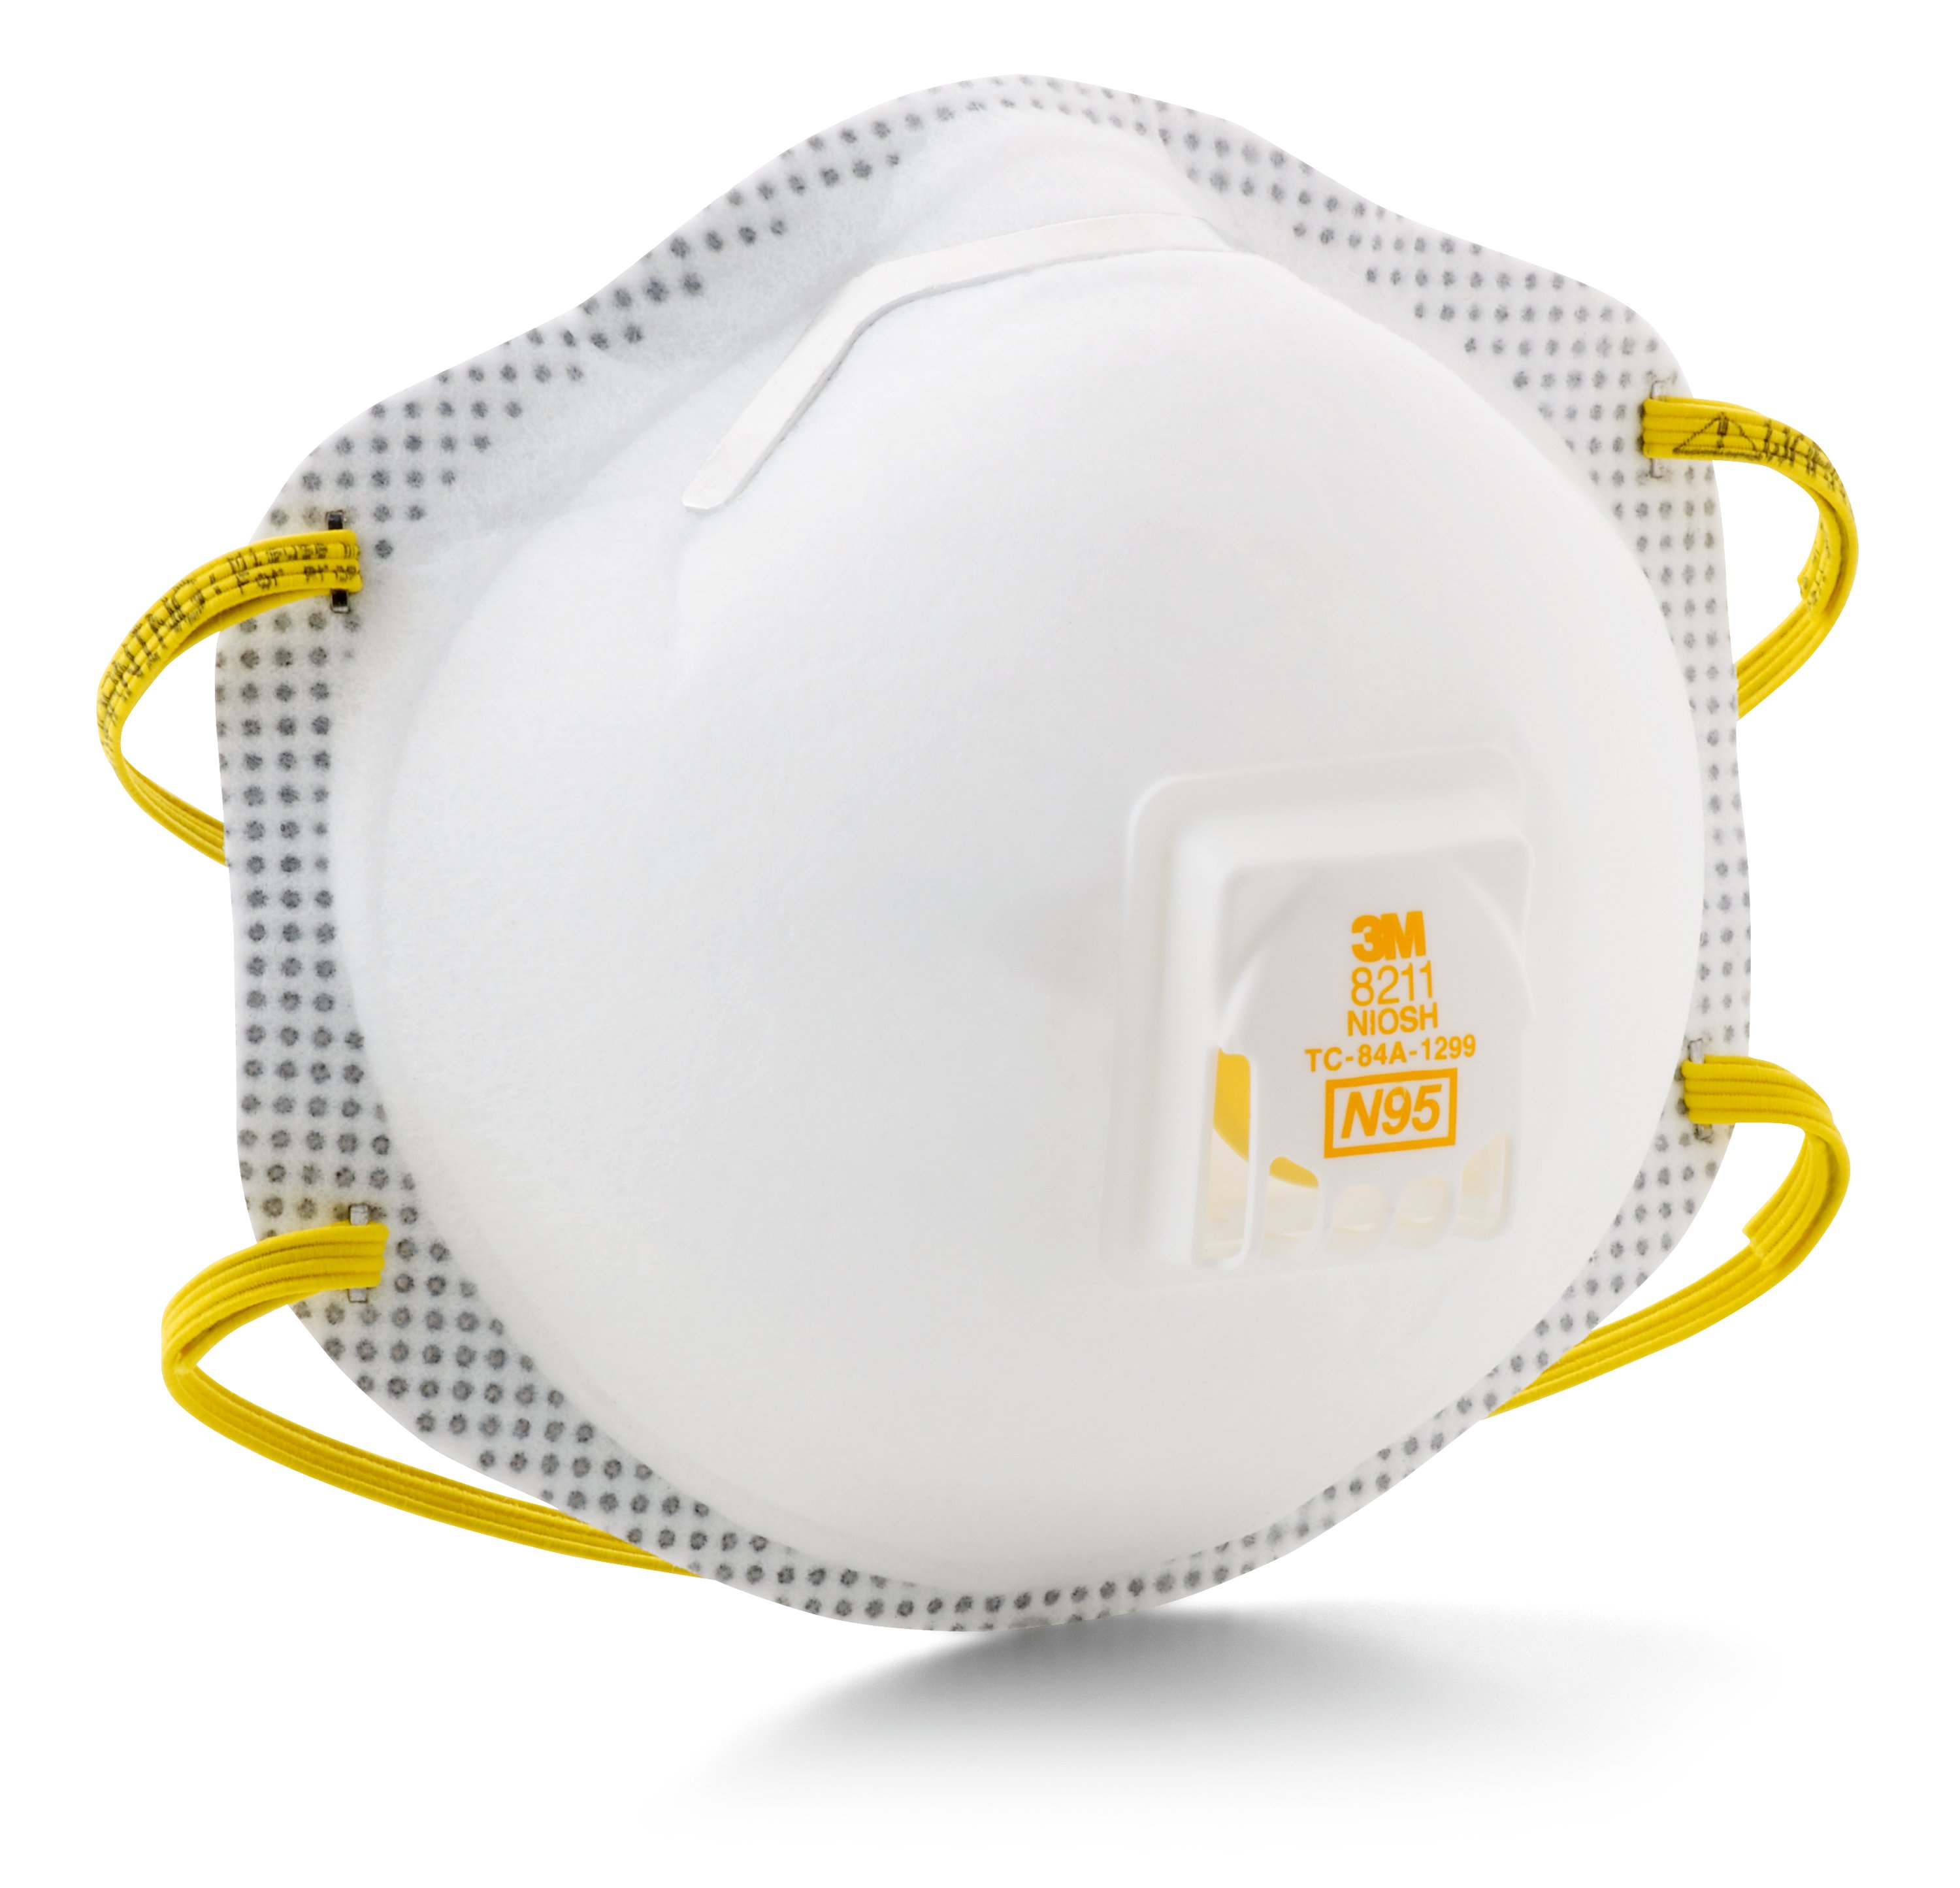 3M™ 8211 Standard Particulate Respirator, Resists: Non-Oil Based Particles